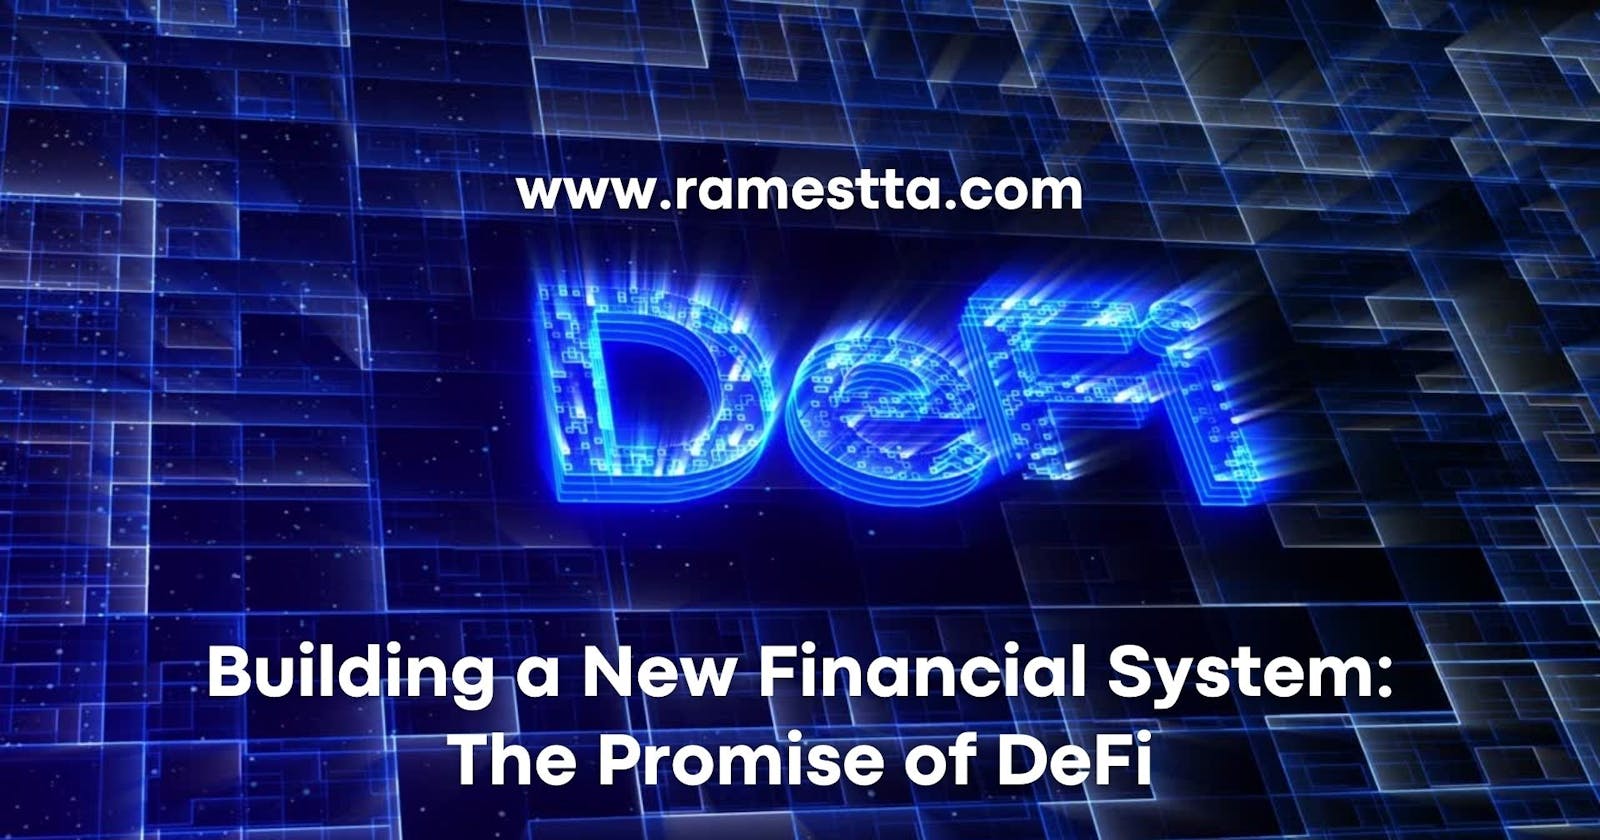 Building a New Financial System: The Promise of DeFi